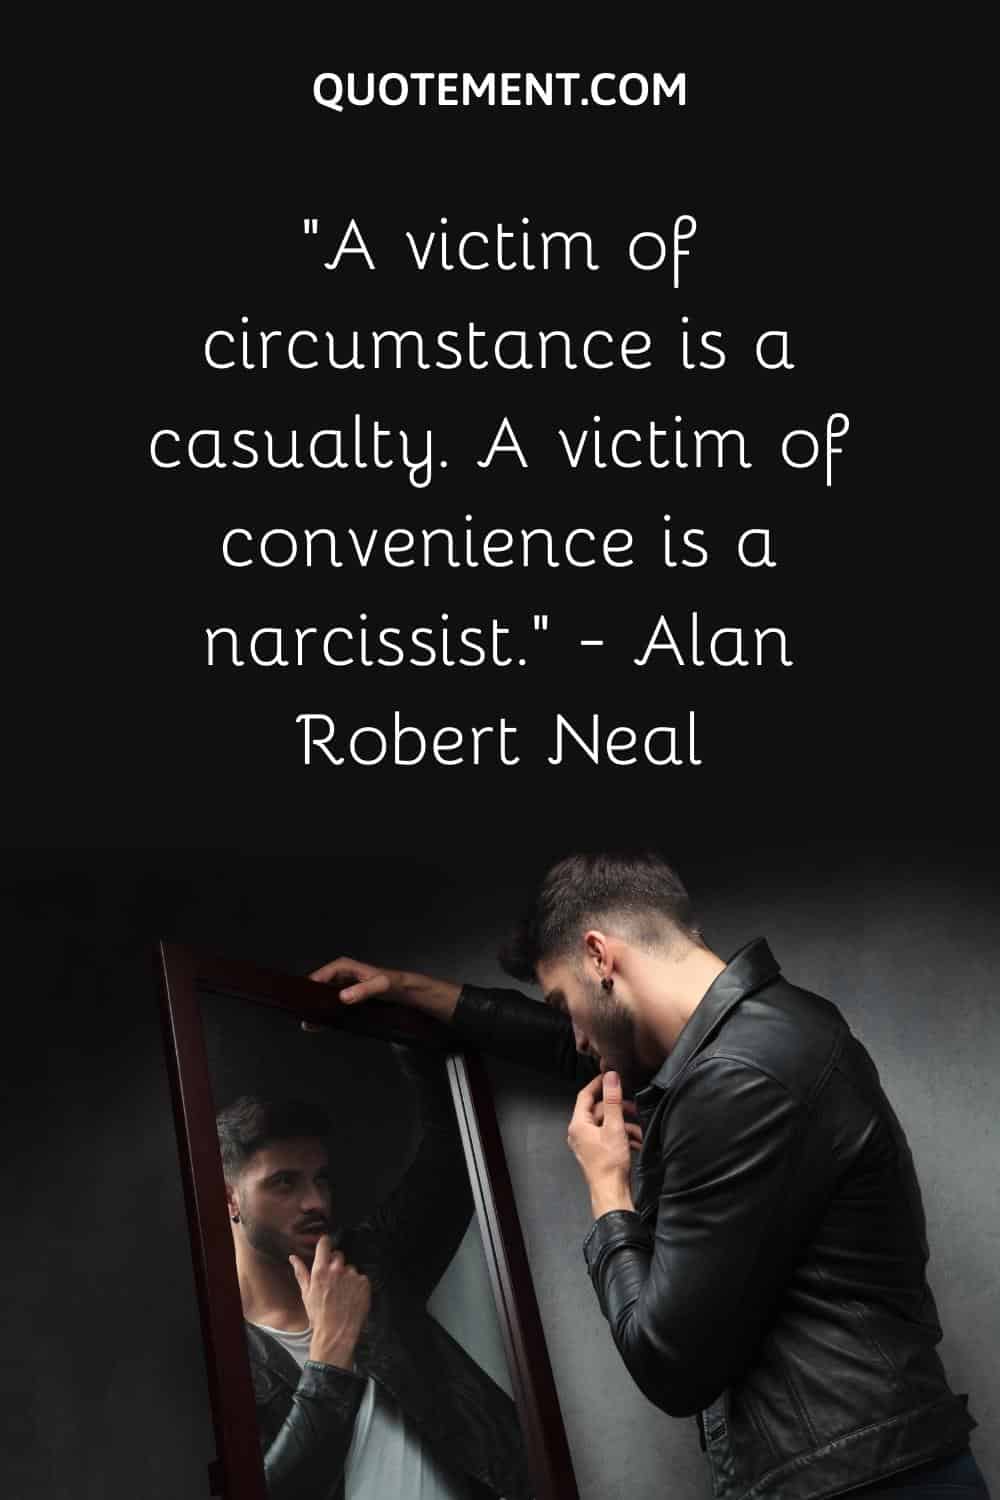 A victim of circumstance is a casualty